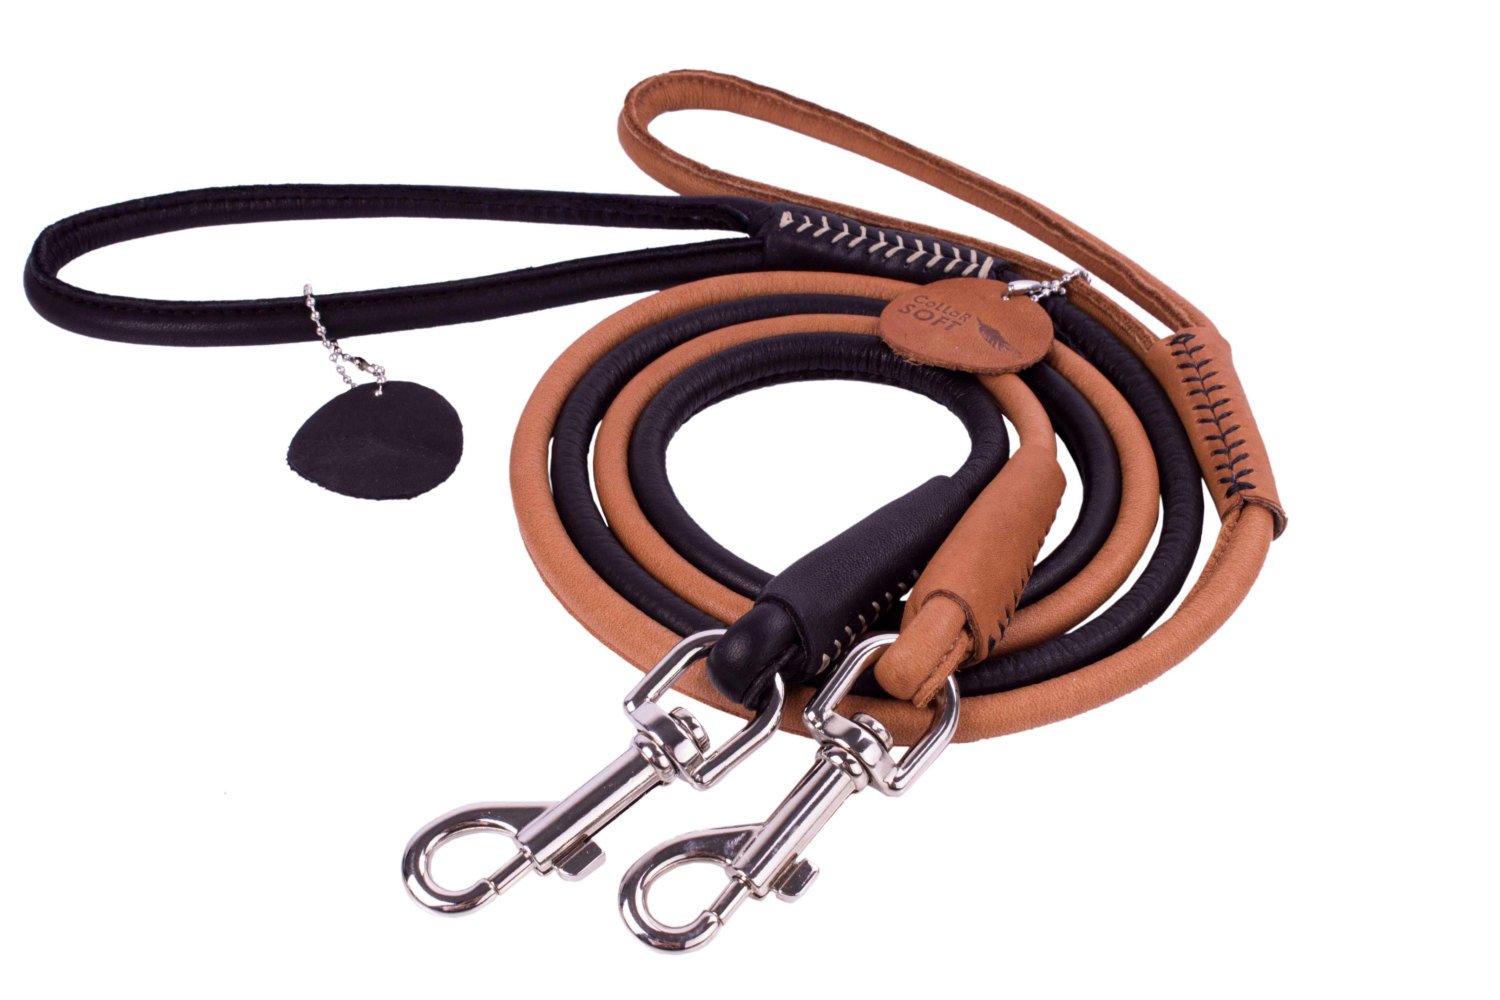 Round-stitched leather dog leash - COLLAR SOFT - black or brown - 183 cm